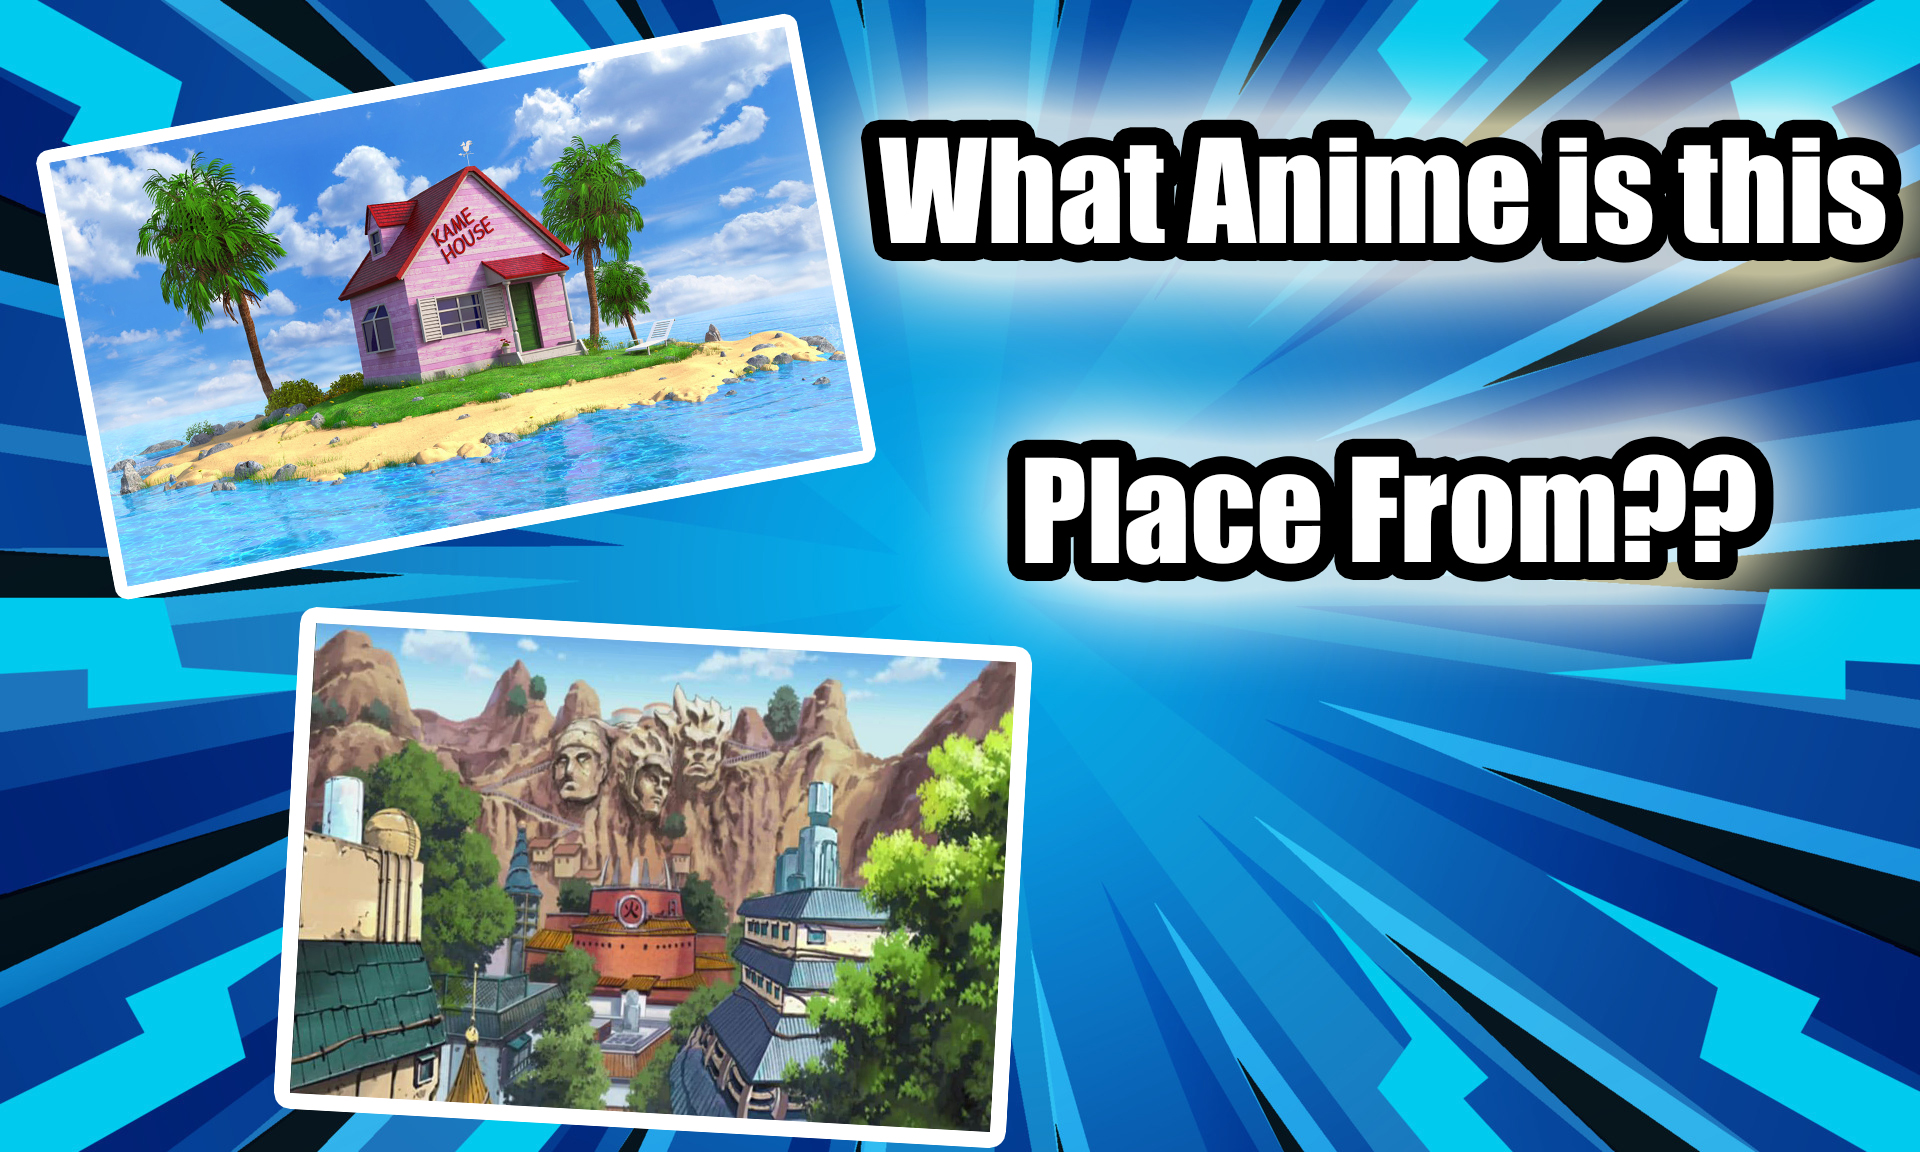 Quiz: What Anime is this Place from?